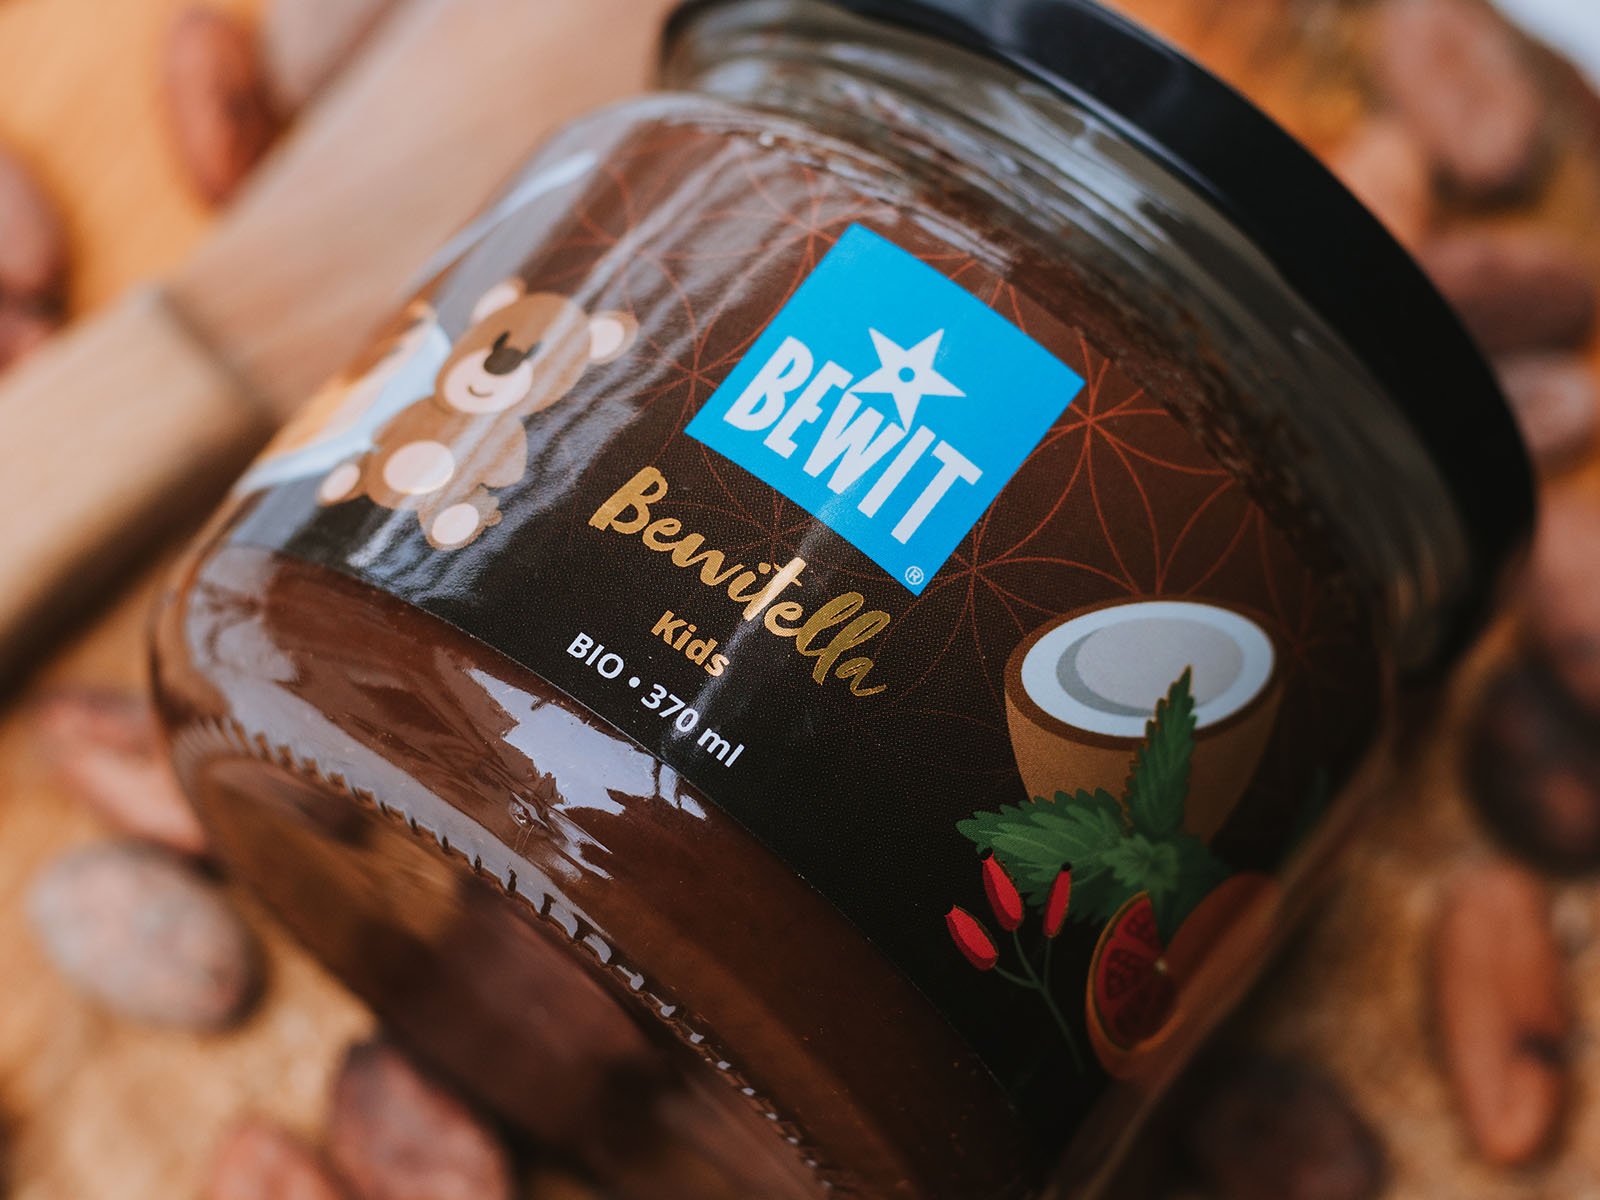 BEWIT Organic Bewitella KIDS - DELICIOUS CREAM / SPREAD FROM COCOA BEANS AND OTHER SUPERFOODS FOR CHILDREN - 5